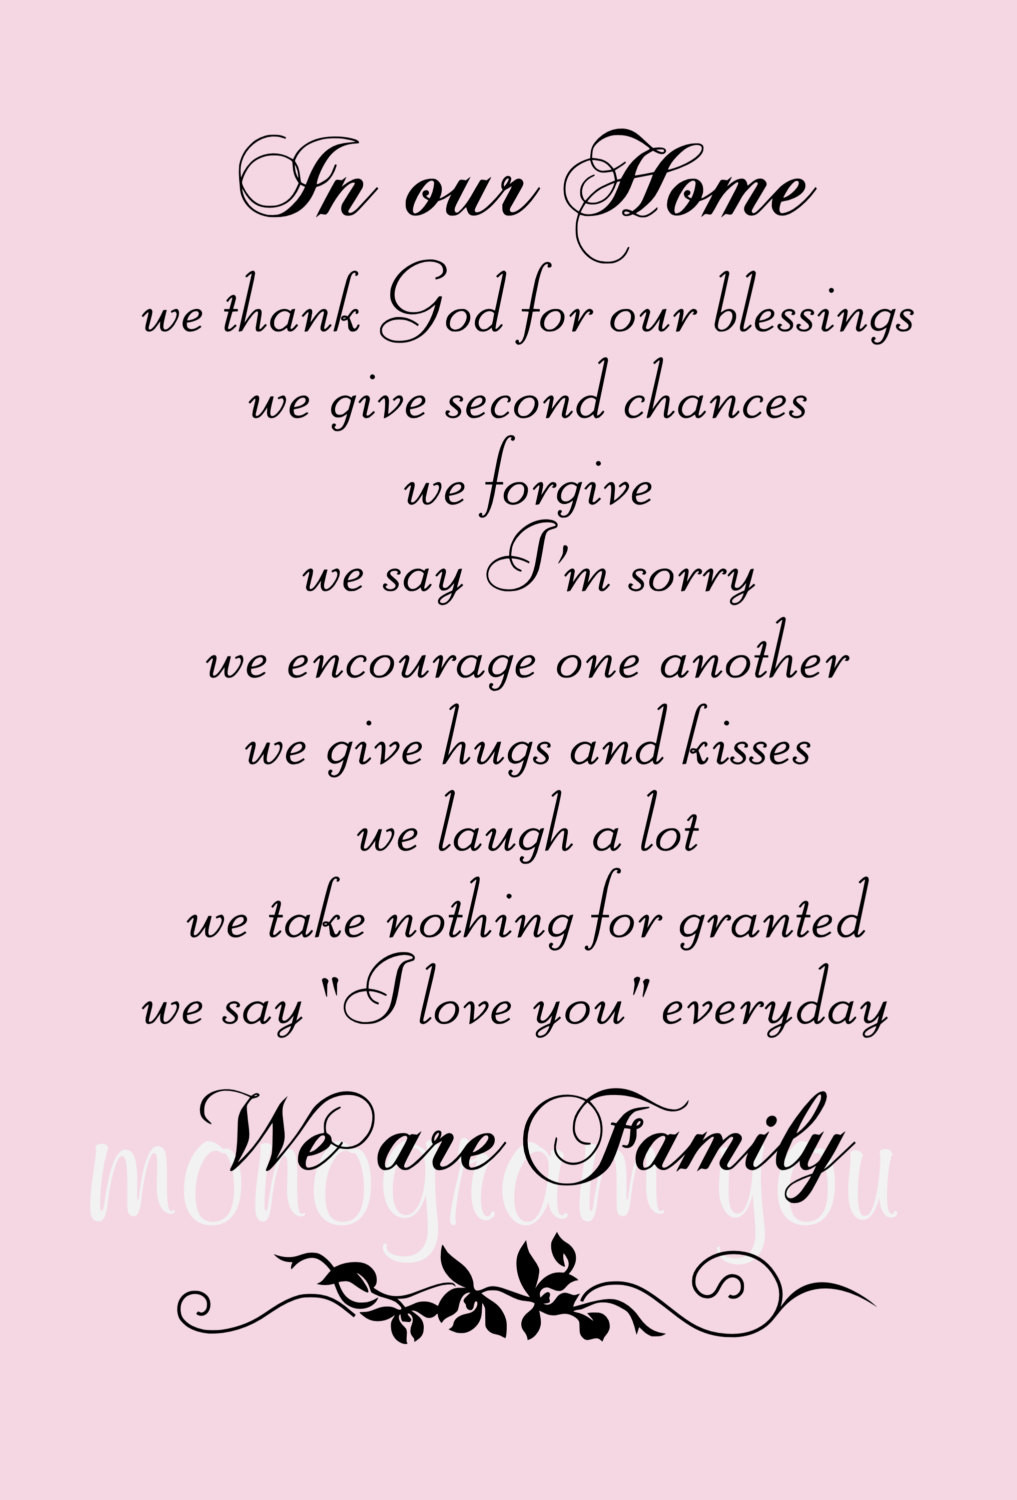 Second Family Quotes
 Family Wall Decal Quote In Our Home we thank God for our